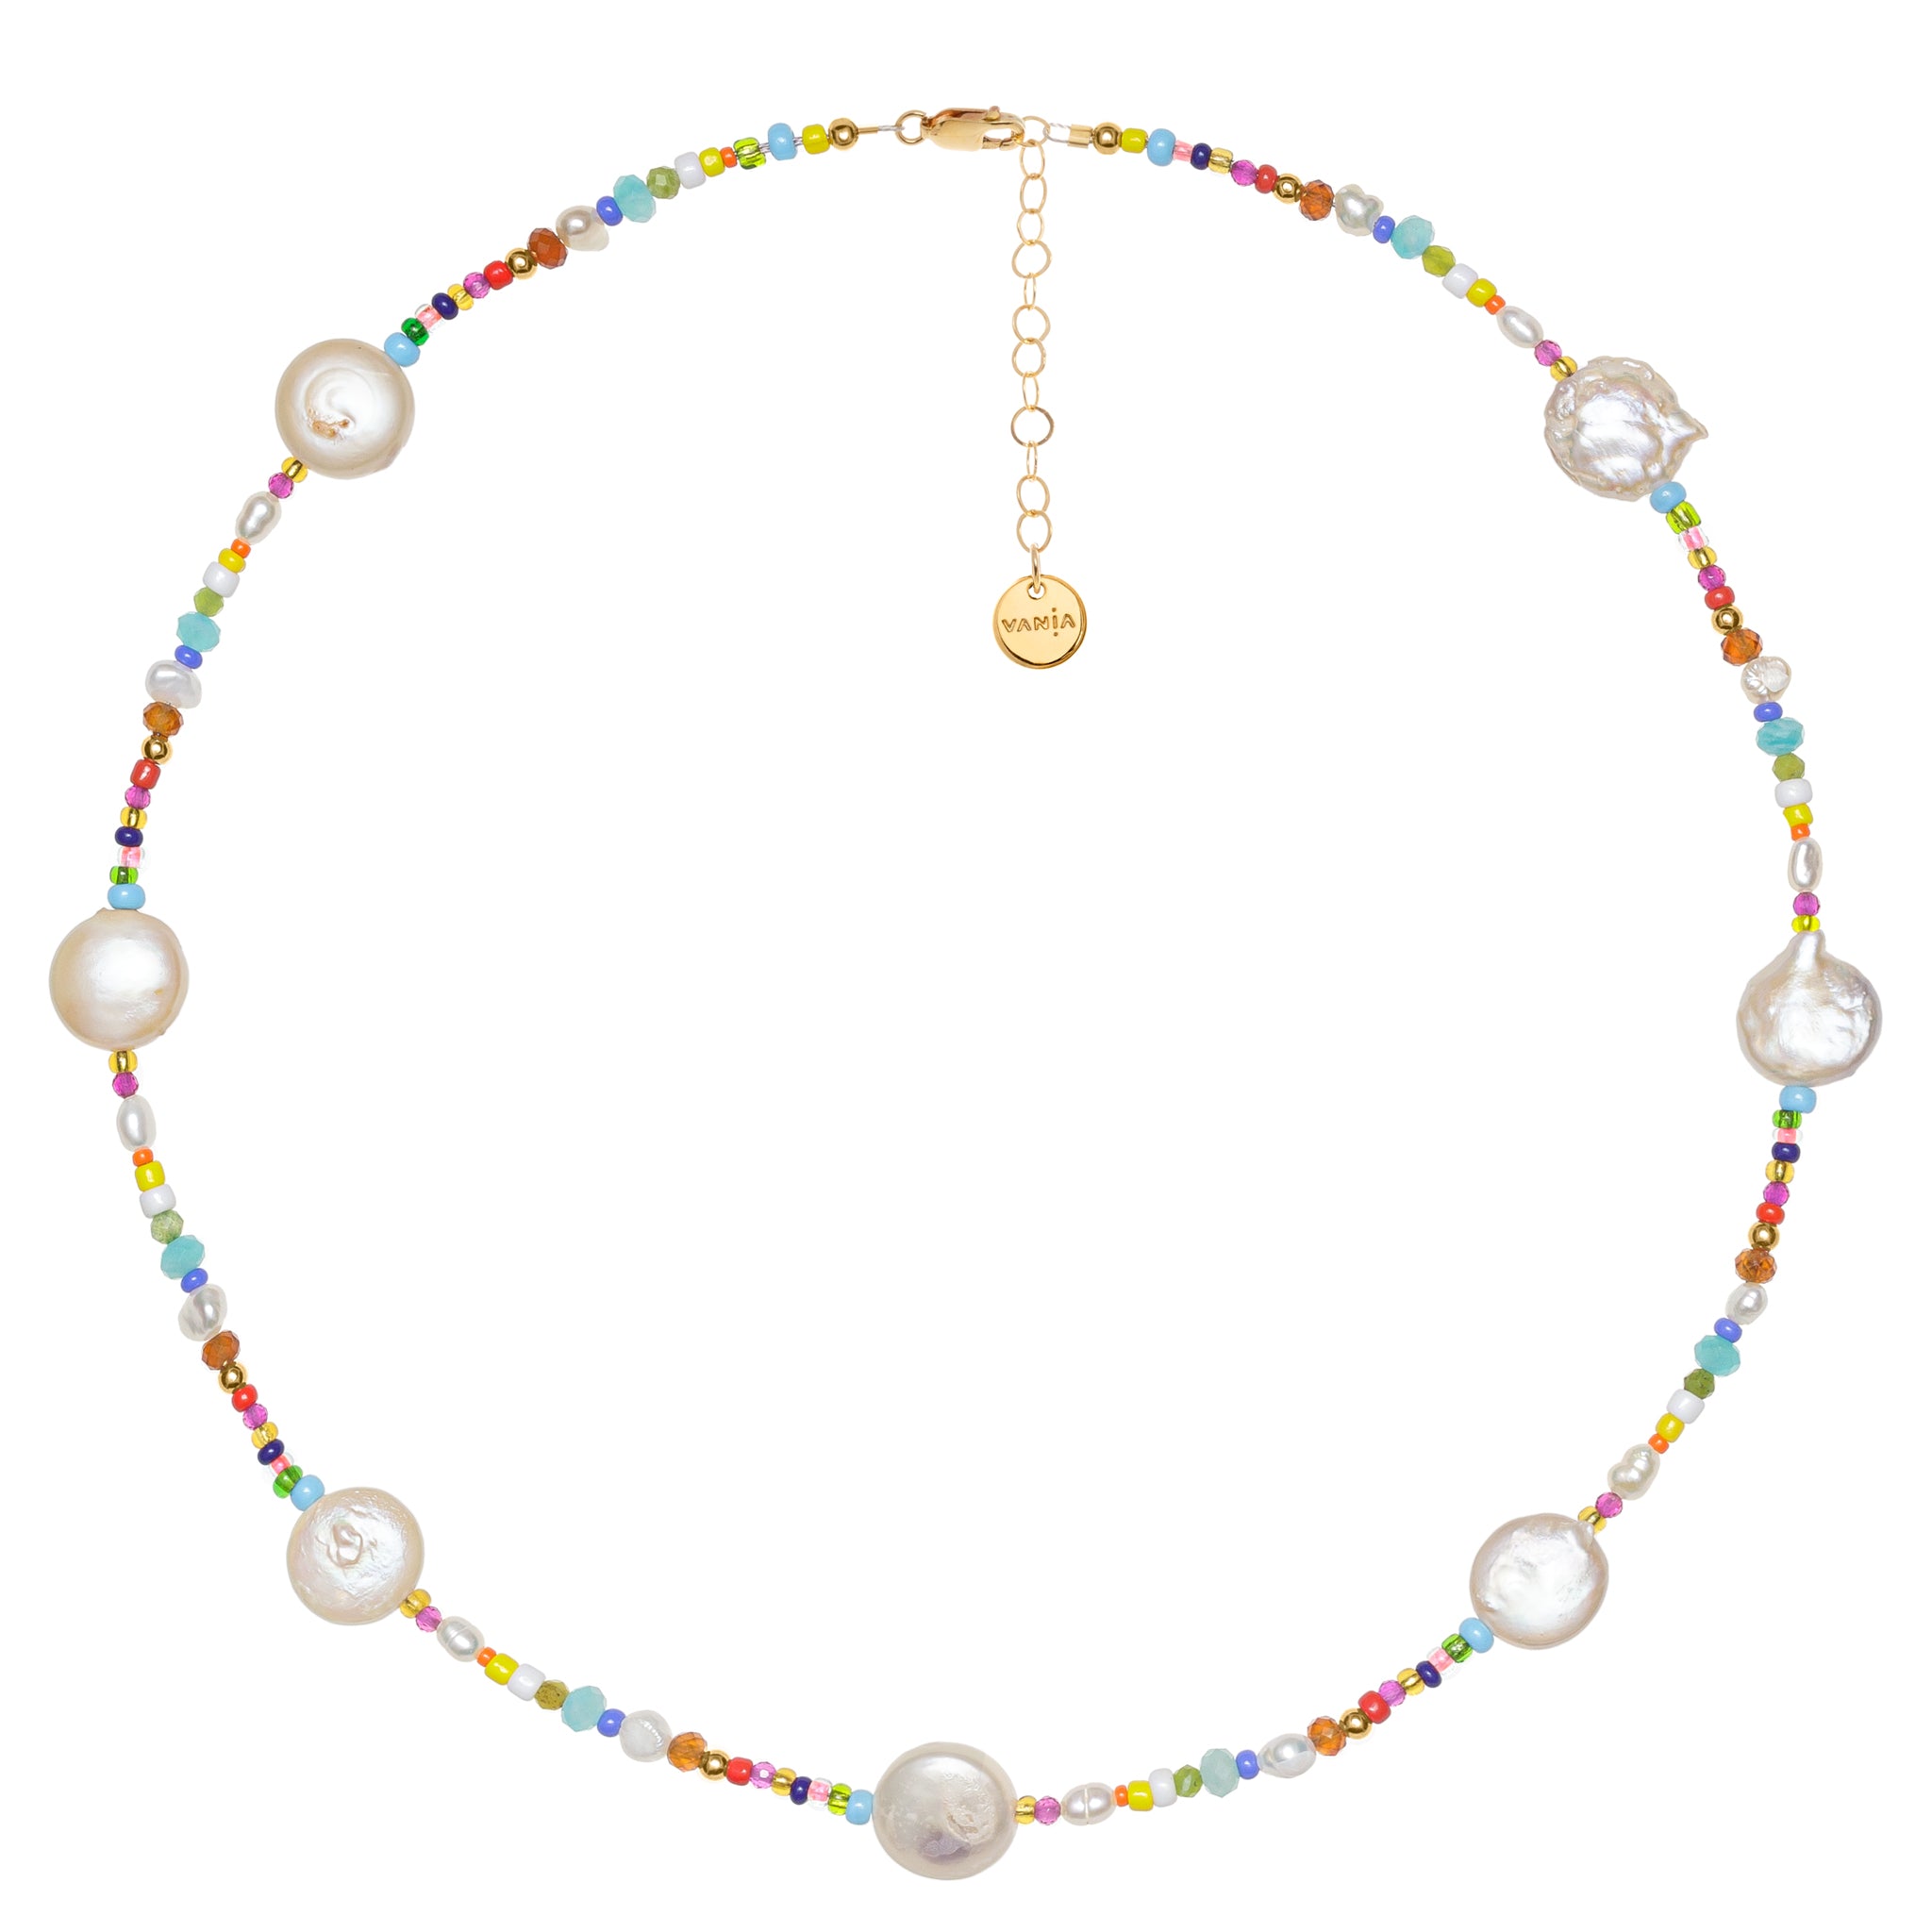 FUN is a gift Necklace – V A N I A